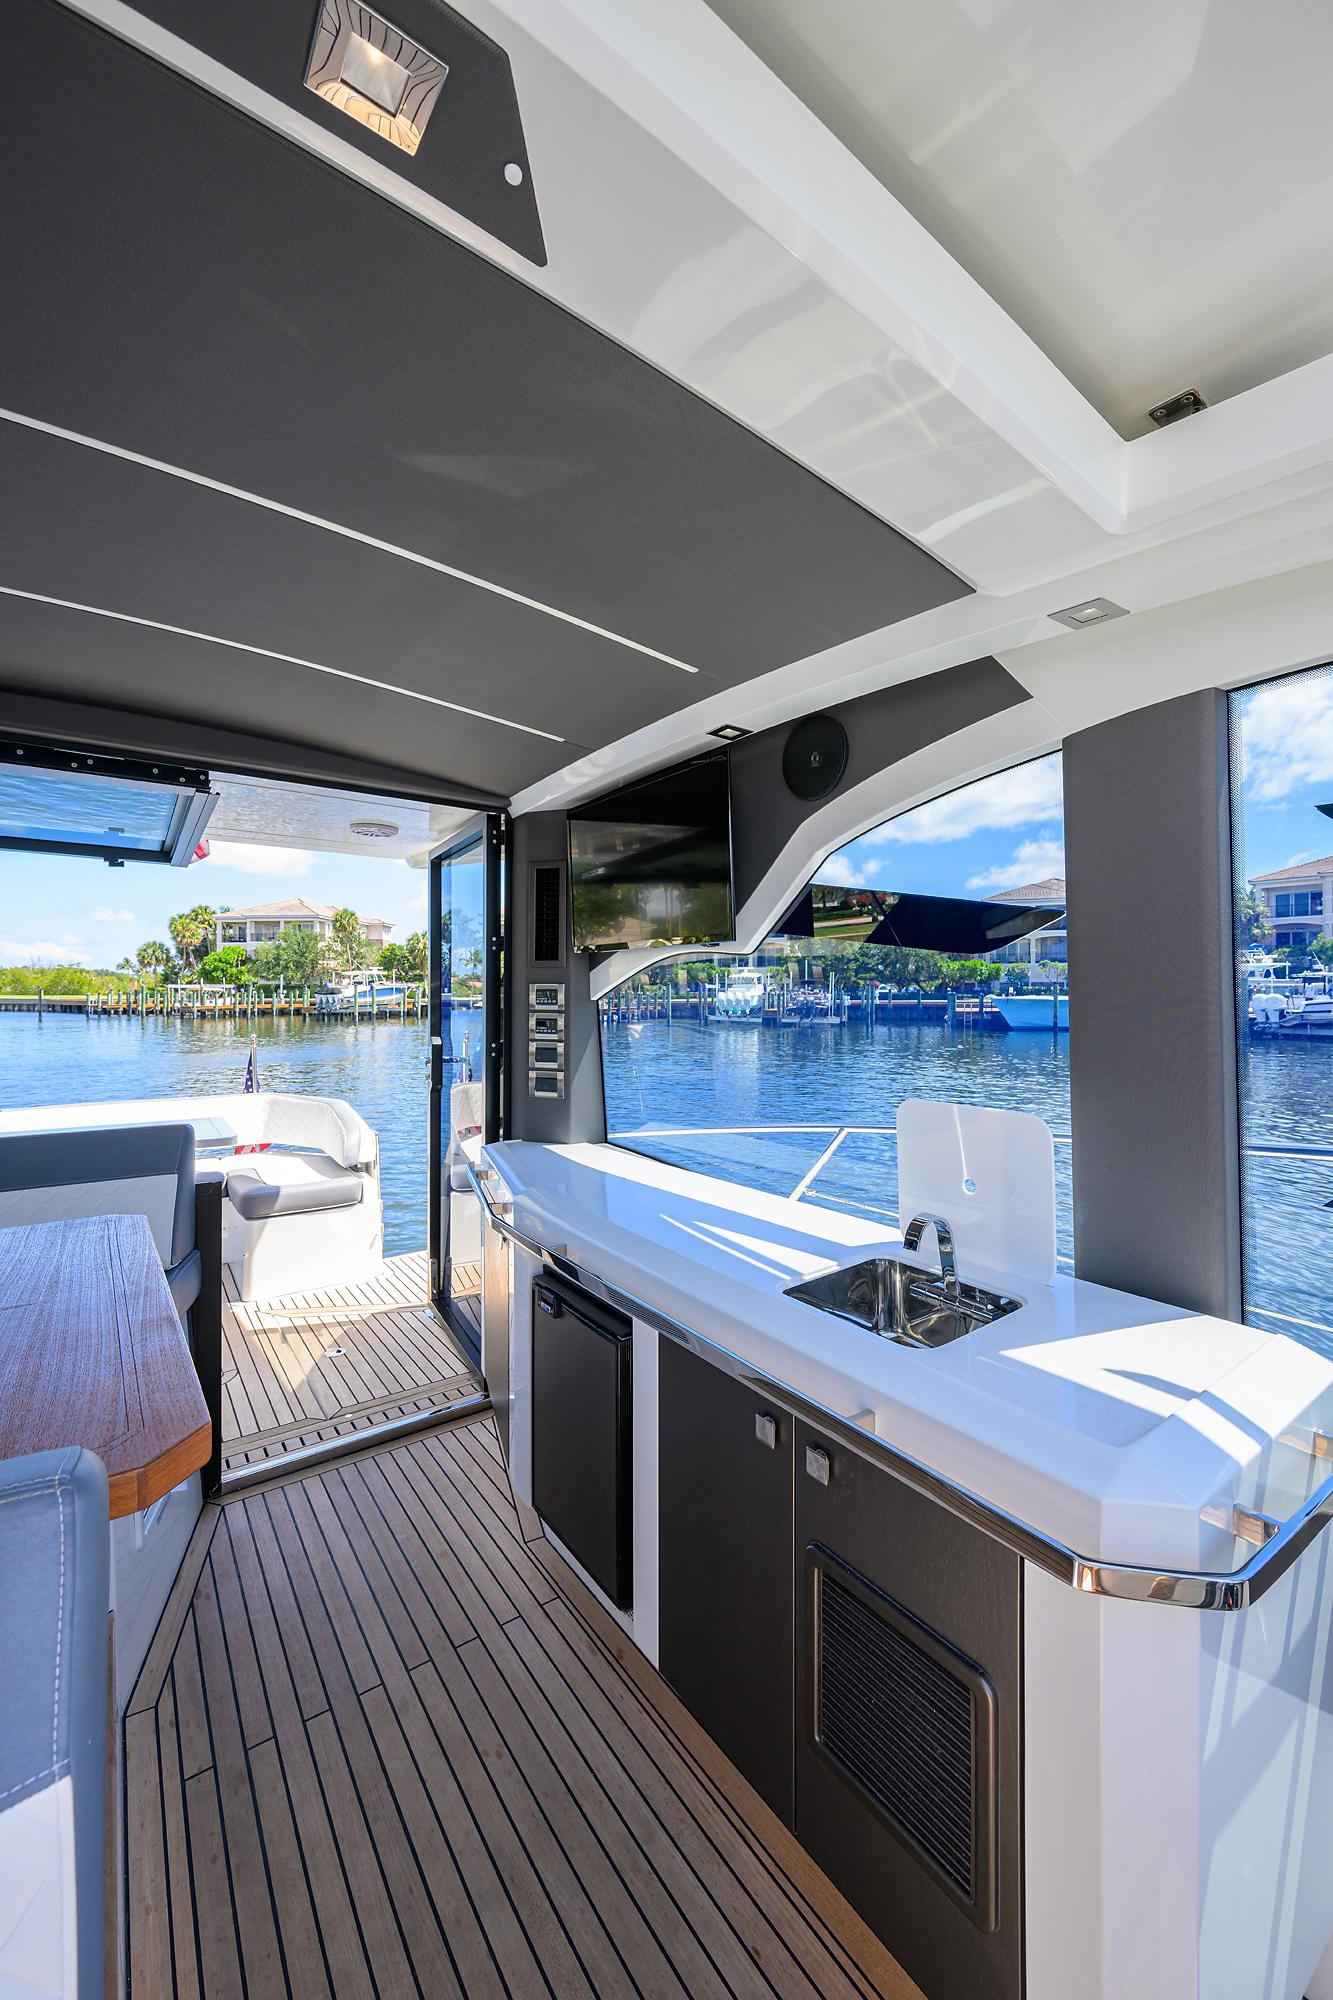 2021 Galeon - Outdoor galley/lounge